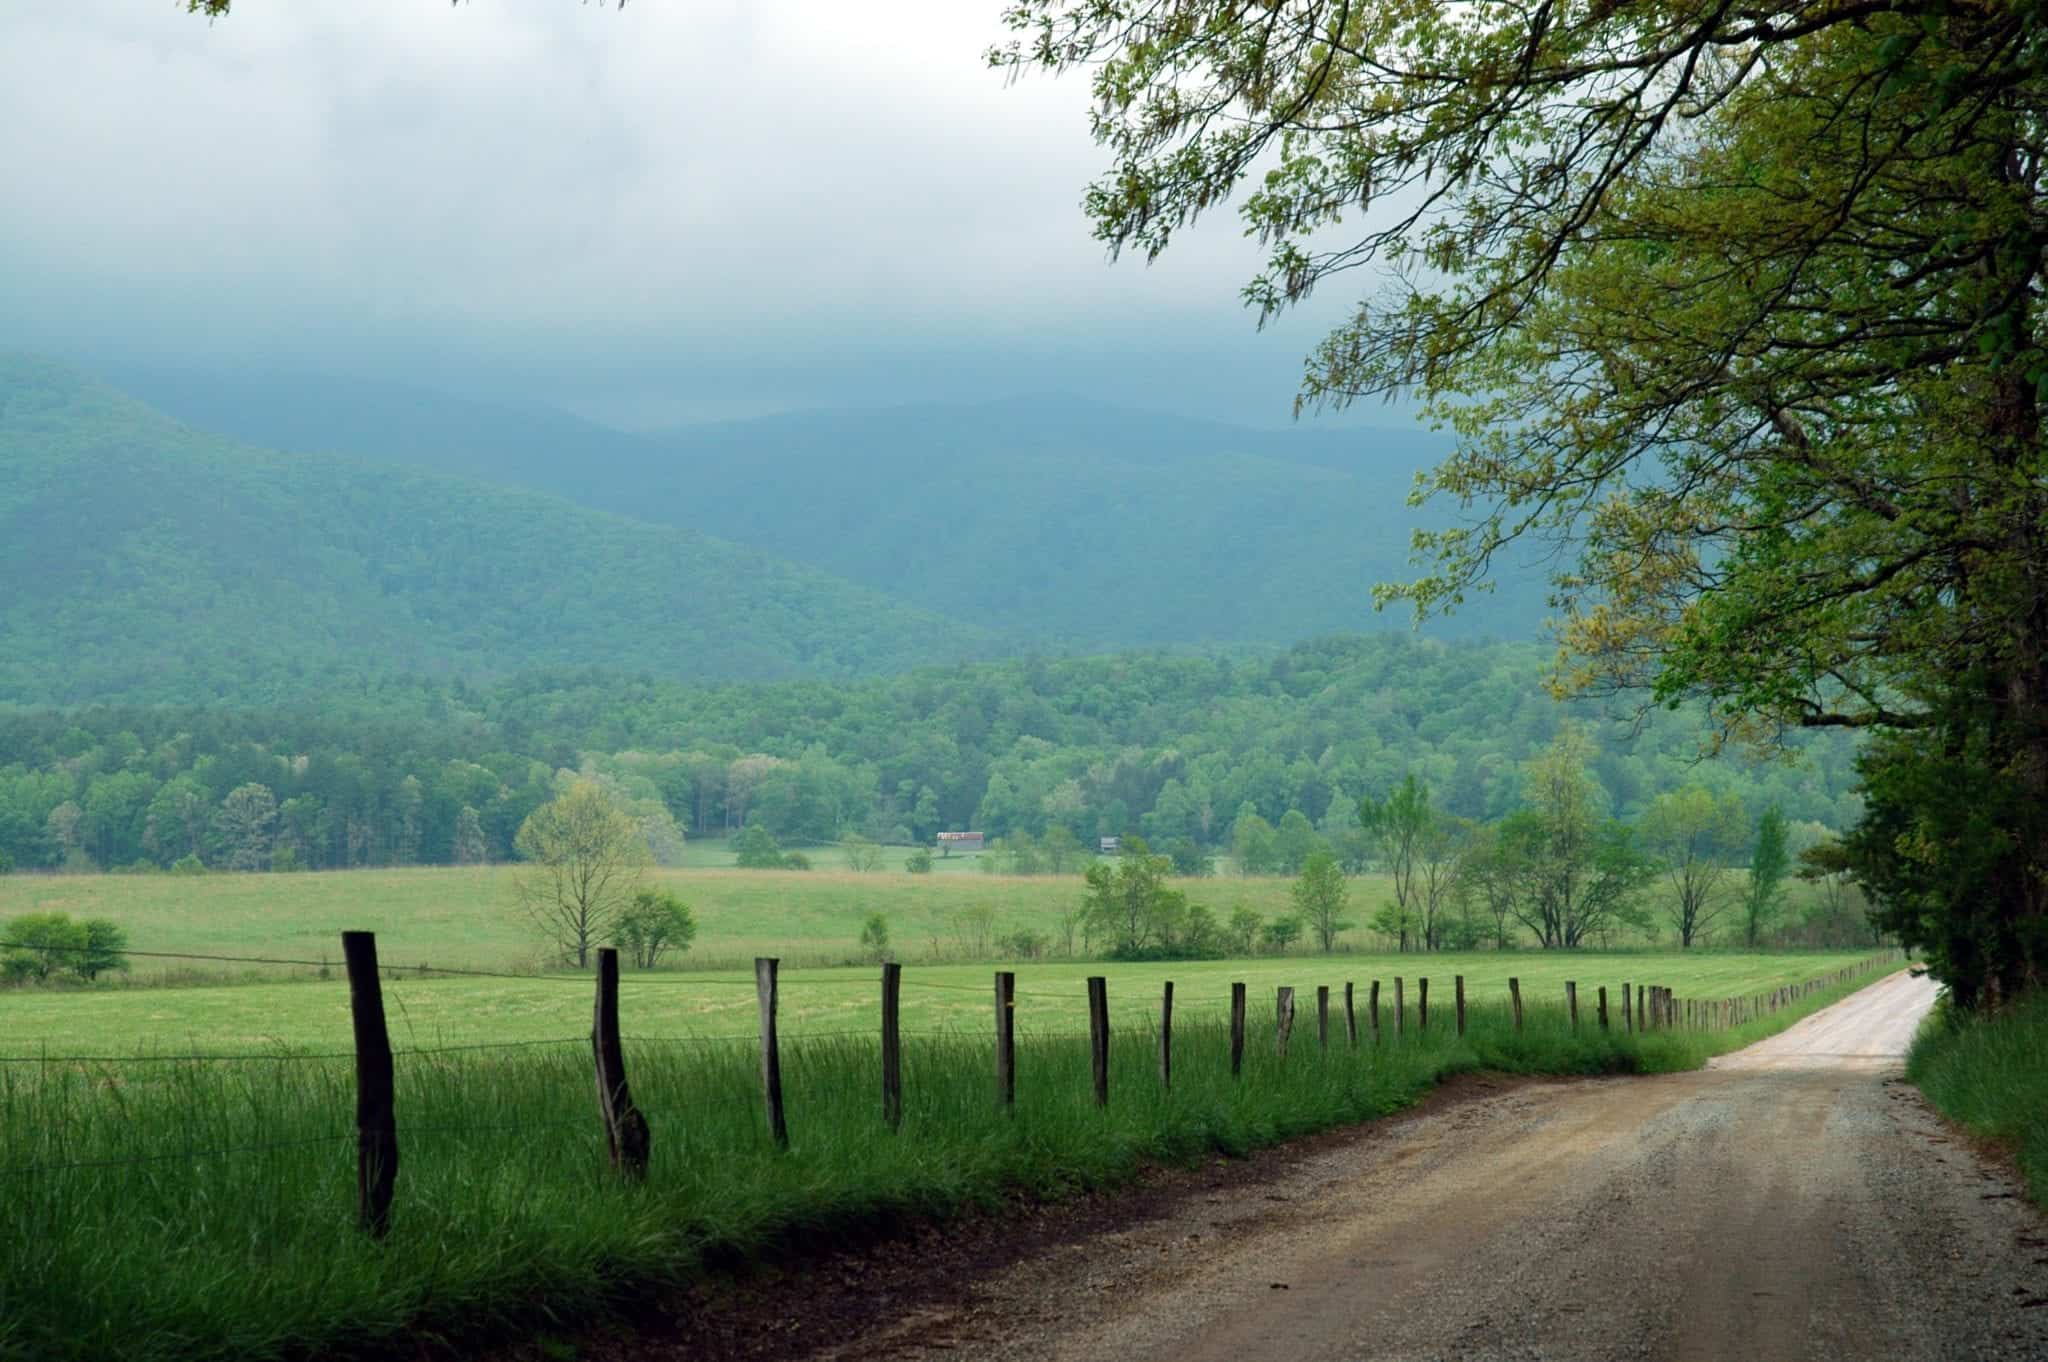 Cades Cove Loop Road | Cades Cove Loop in the Smoky Mountains